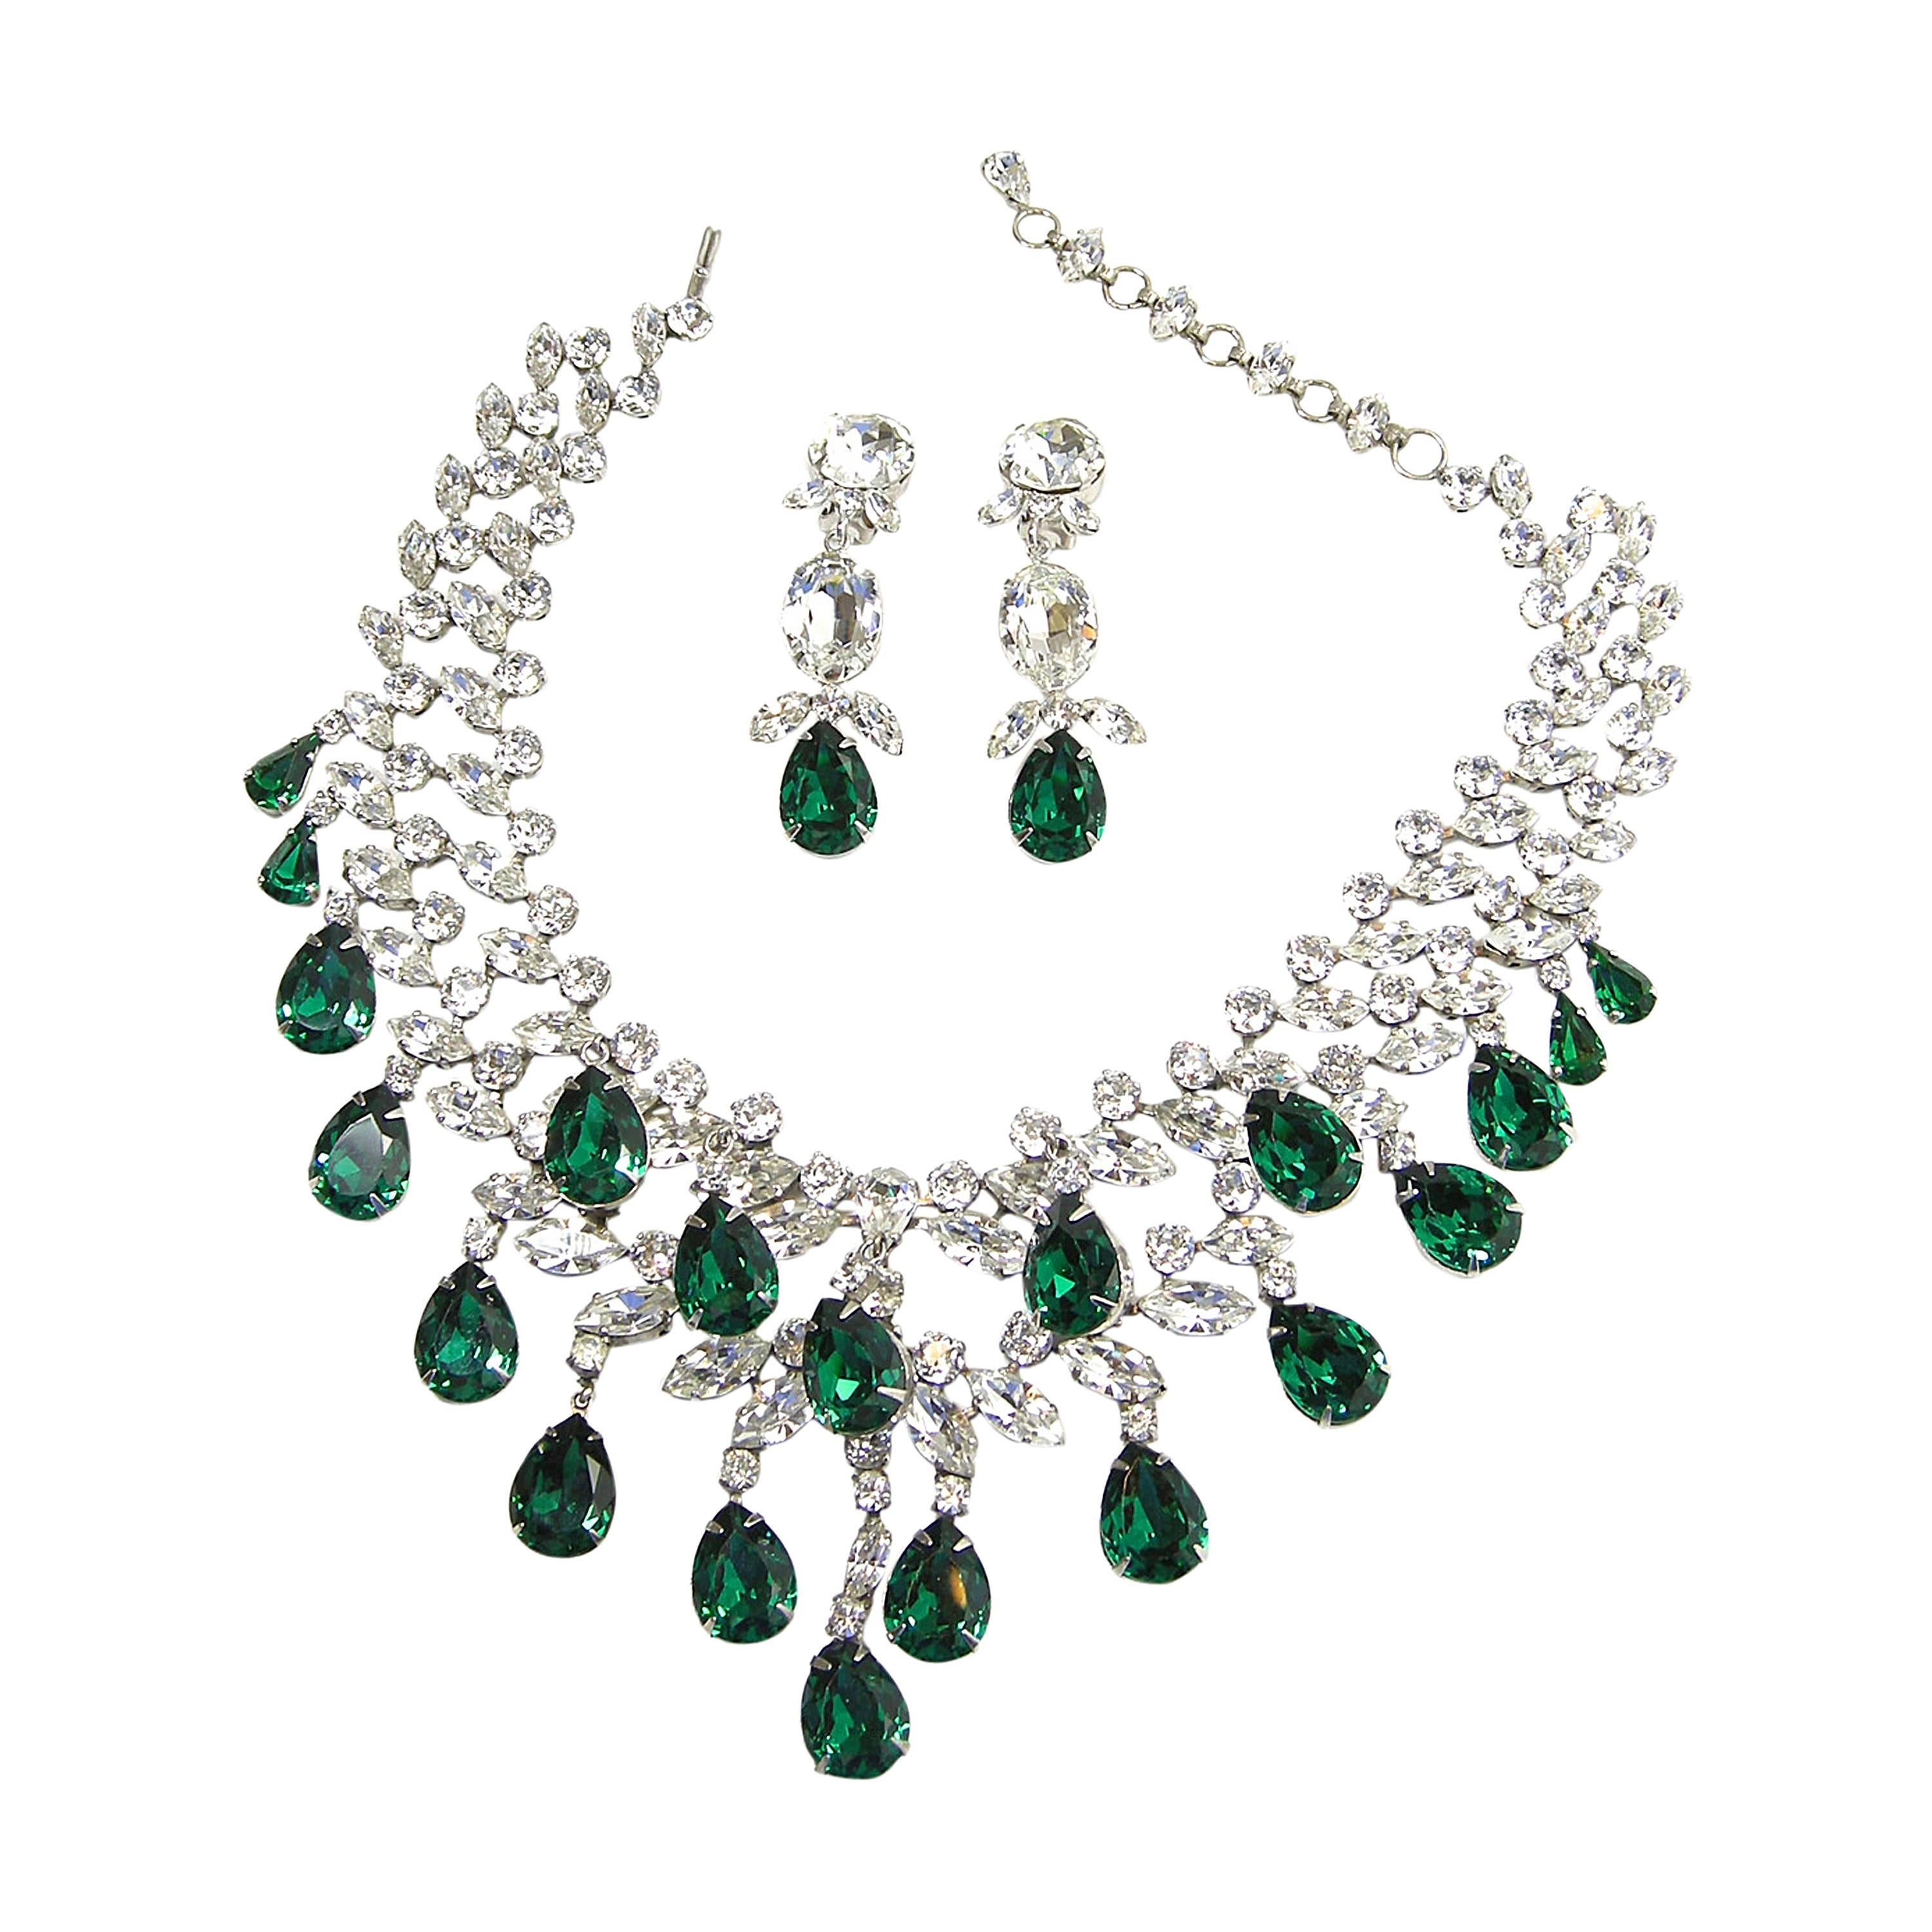 Vintage All Signed Schreiner Green Crystal Bib Necklace And Earrings Set